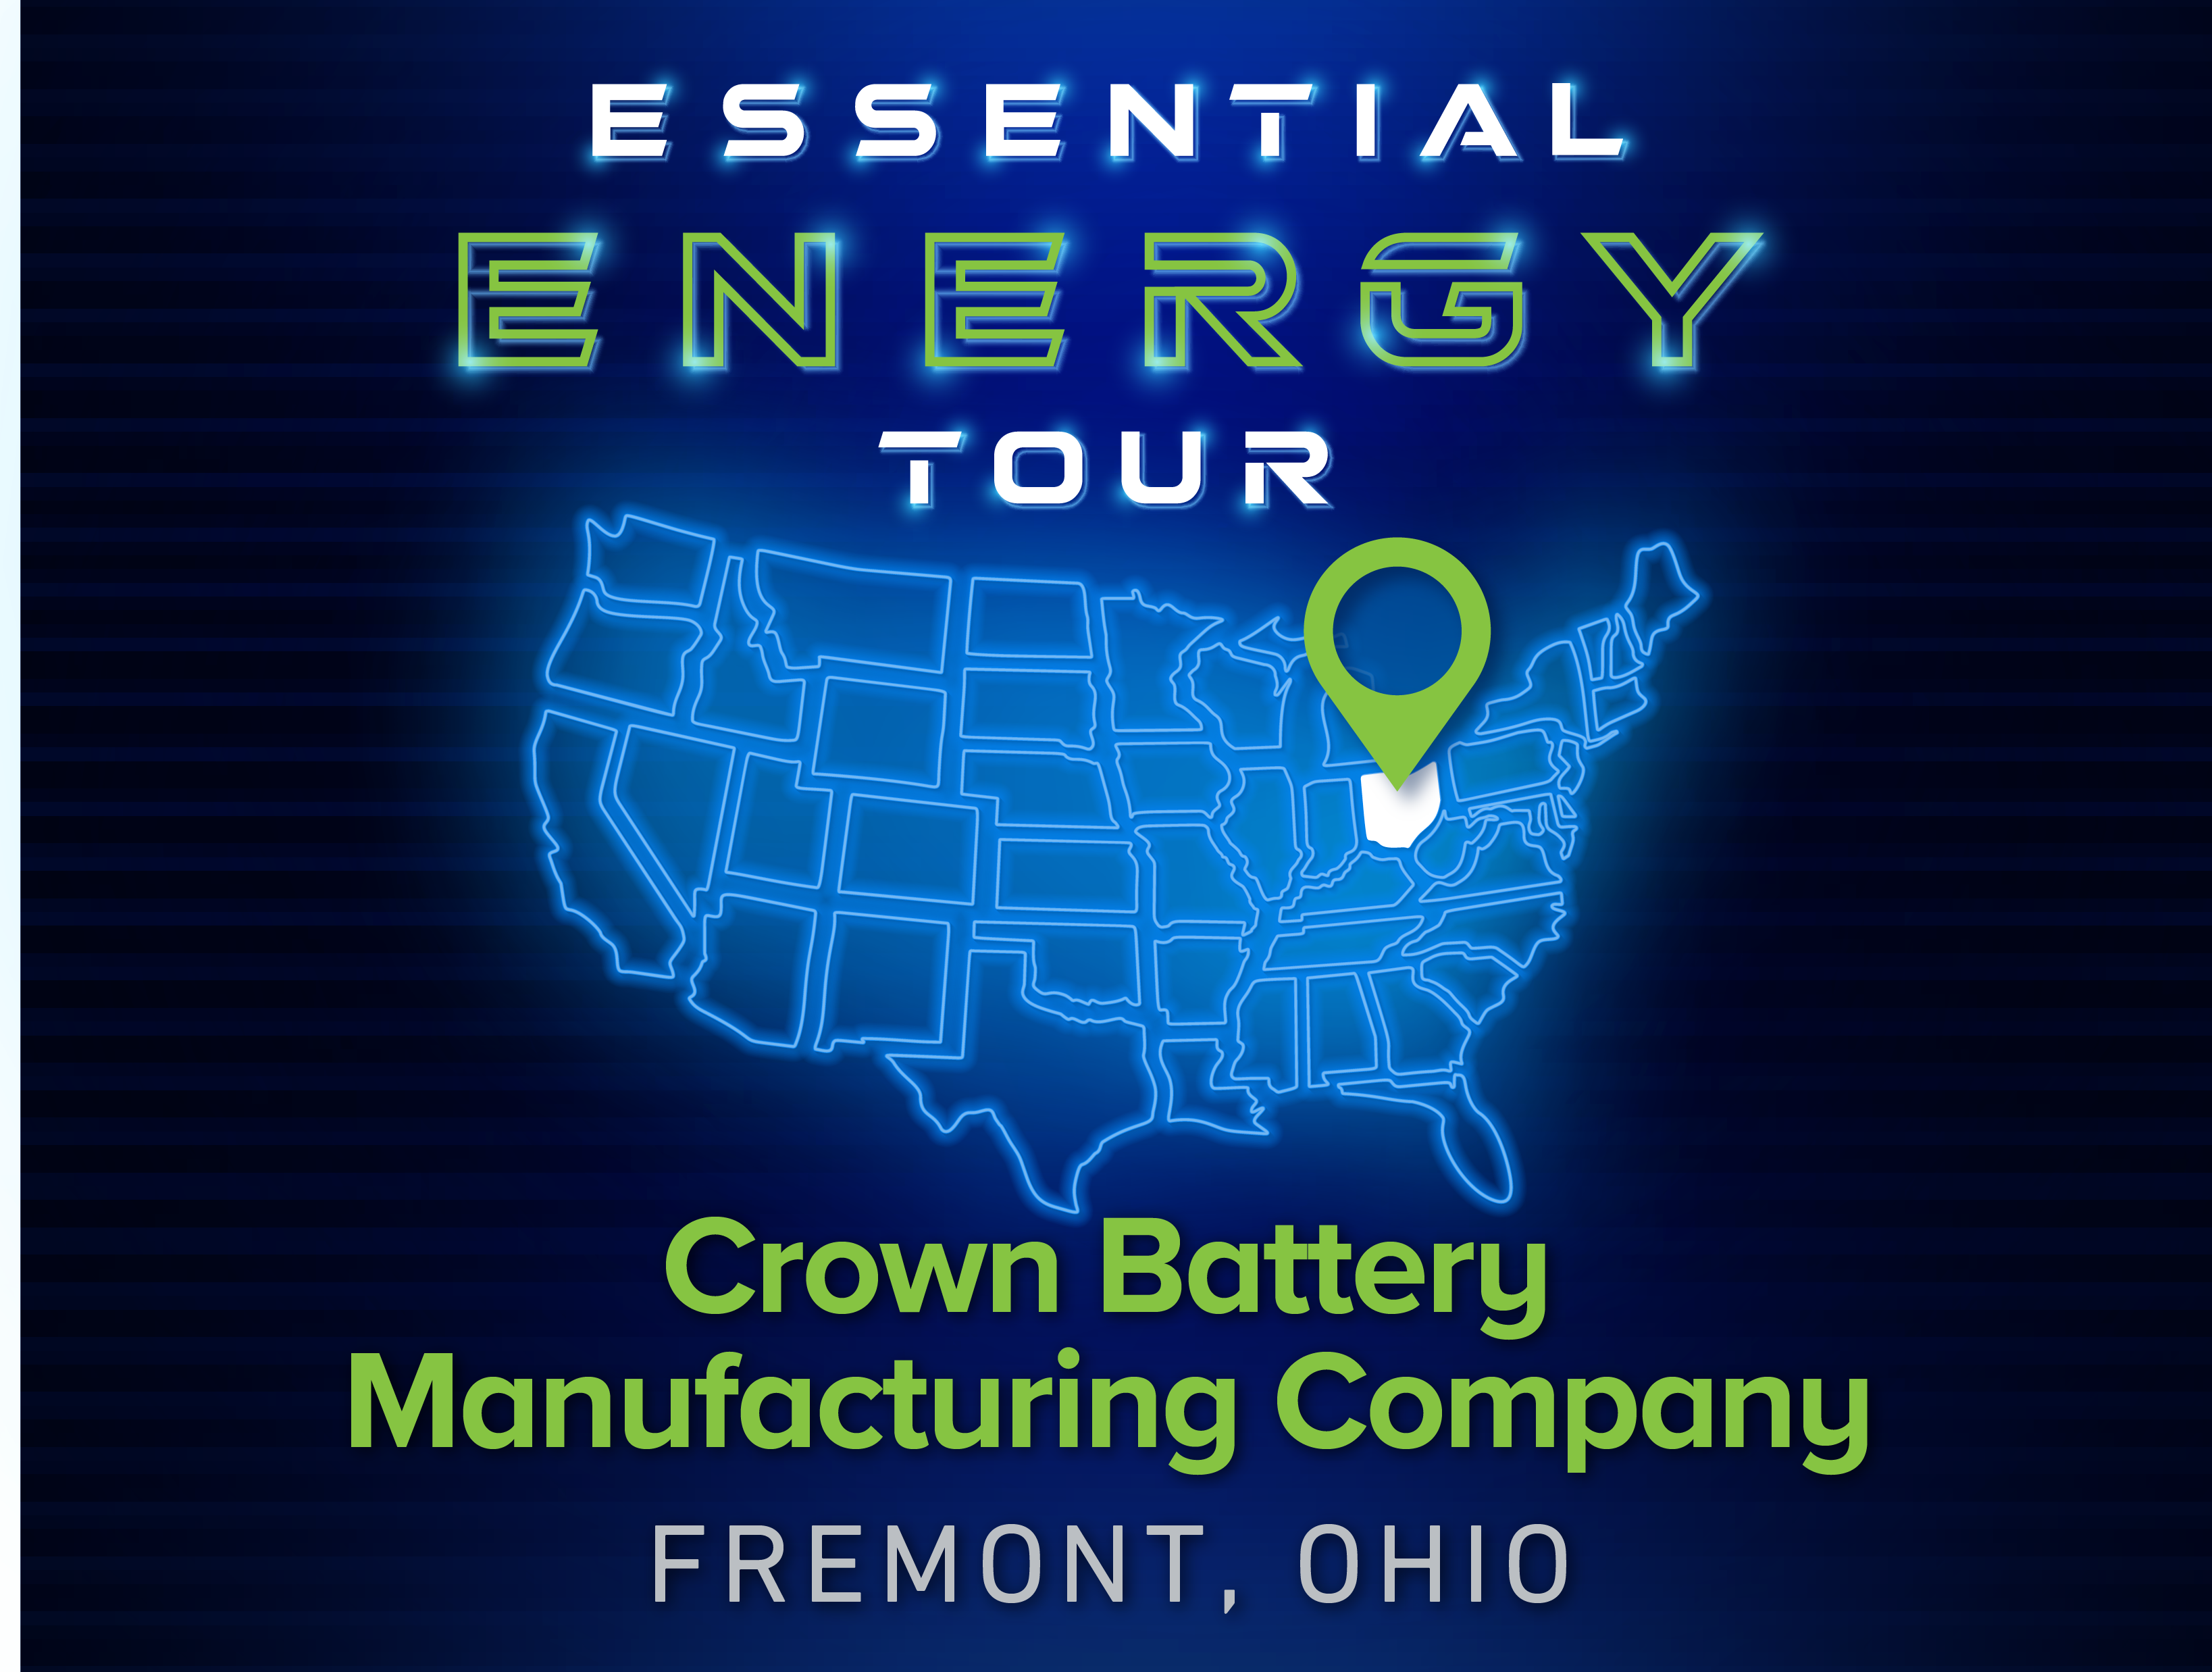 Essential Energy Tour of Crown Battery Manufacturing Company